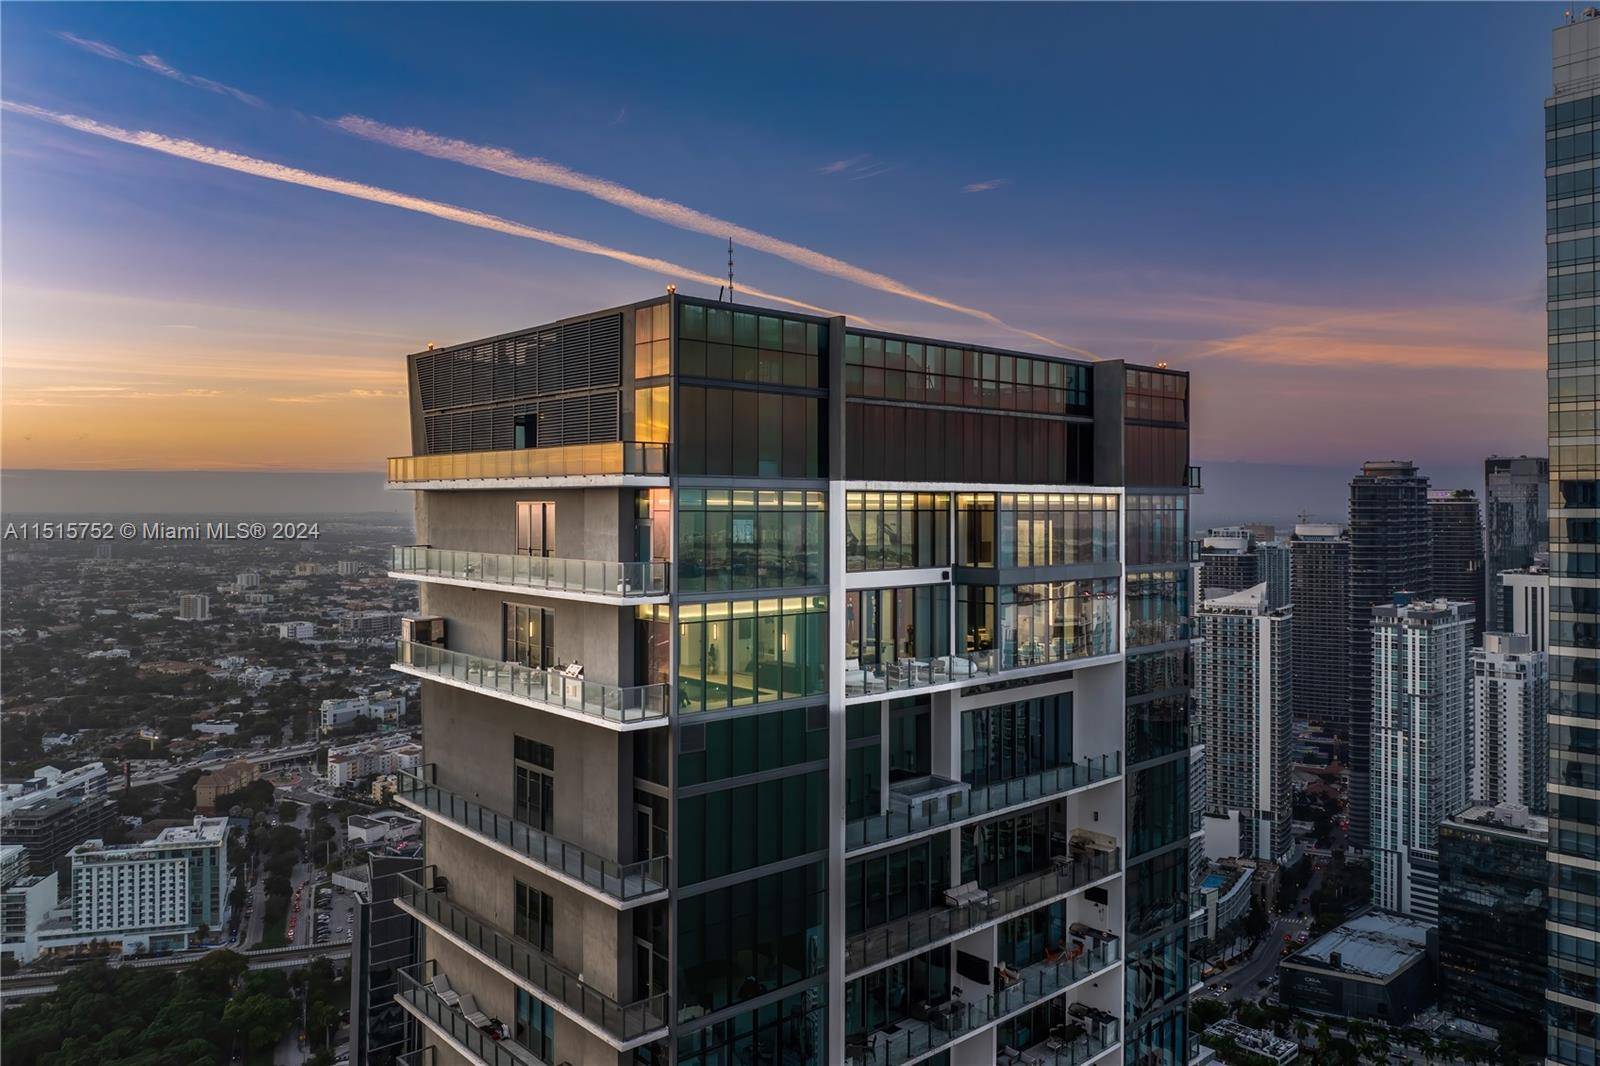 Penthouse living like you've never seen it before at the prestigious Echo Brickell Condominium.